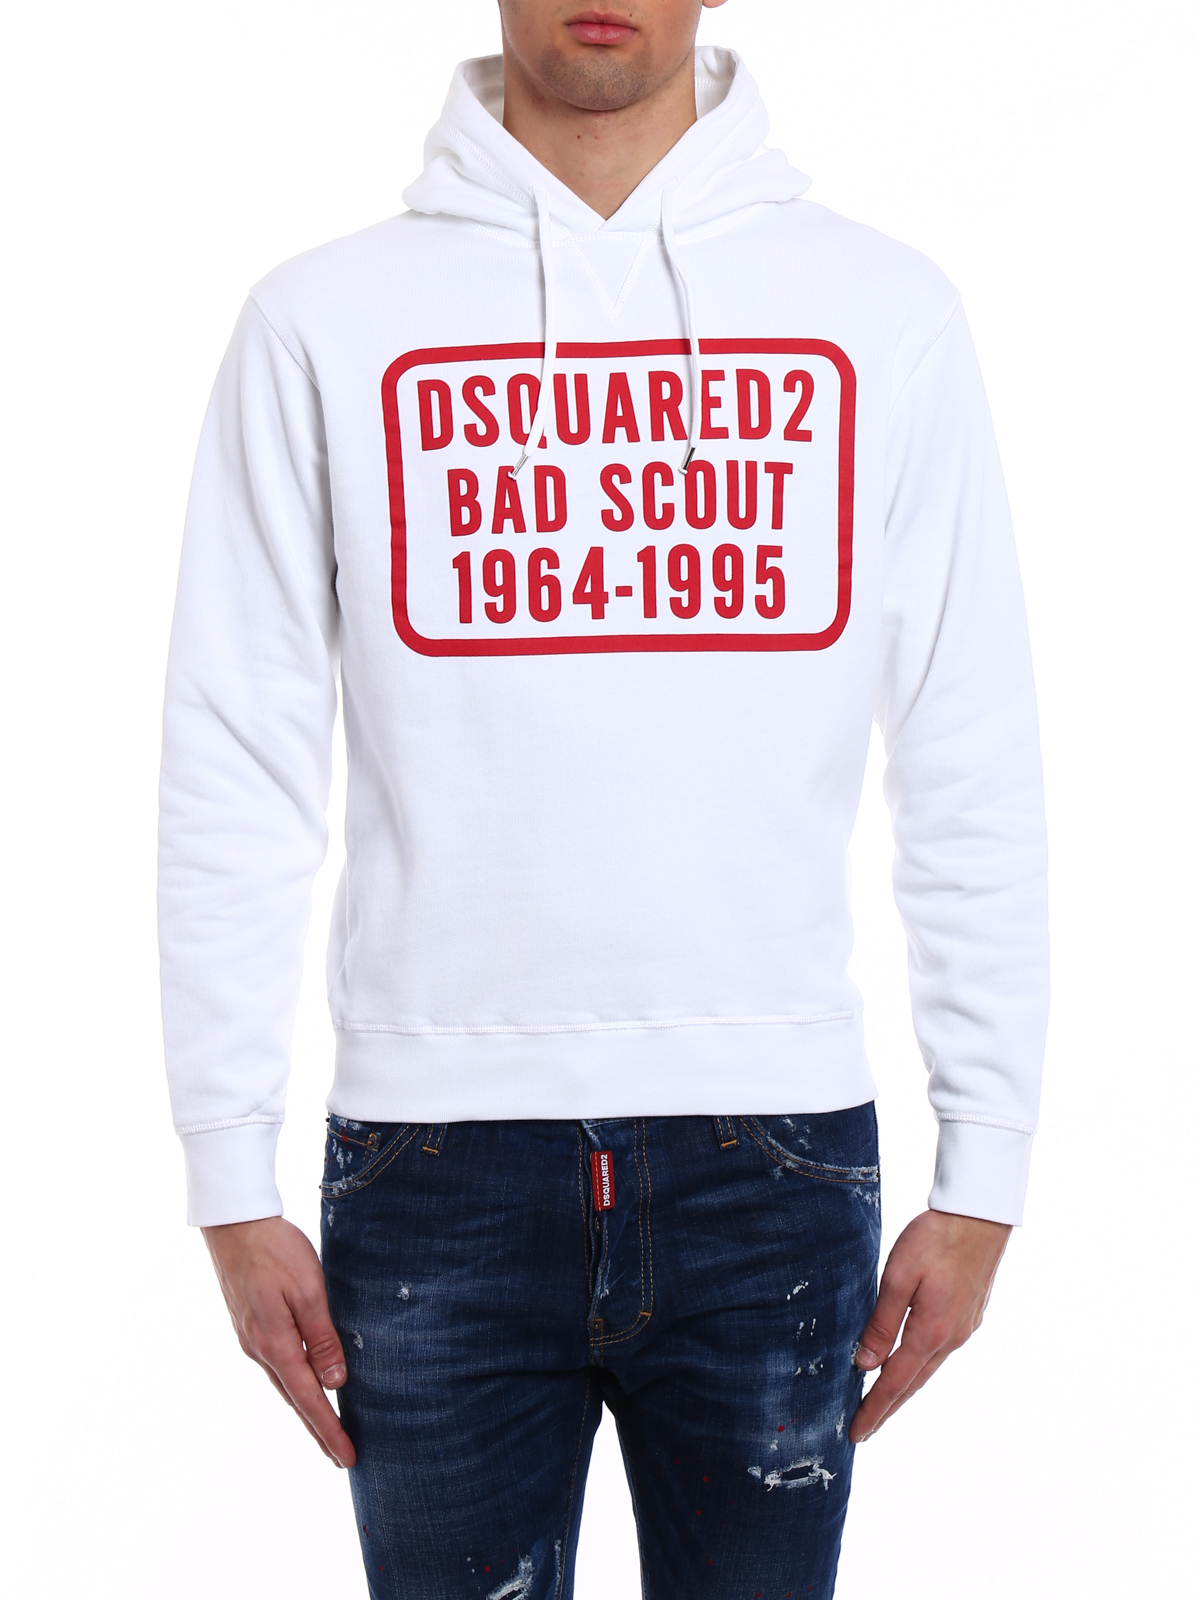 dsquared2 boy scout hoodie